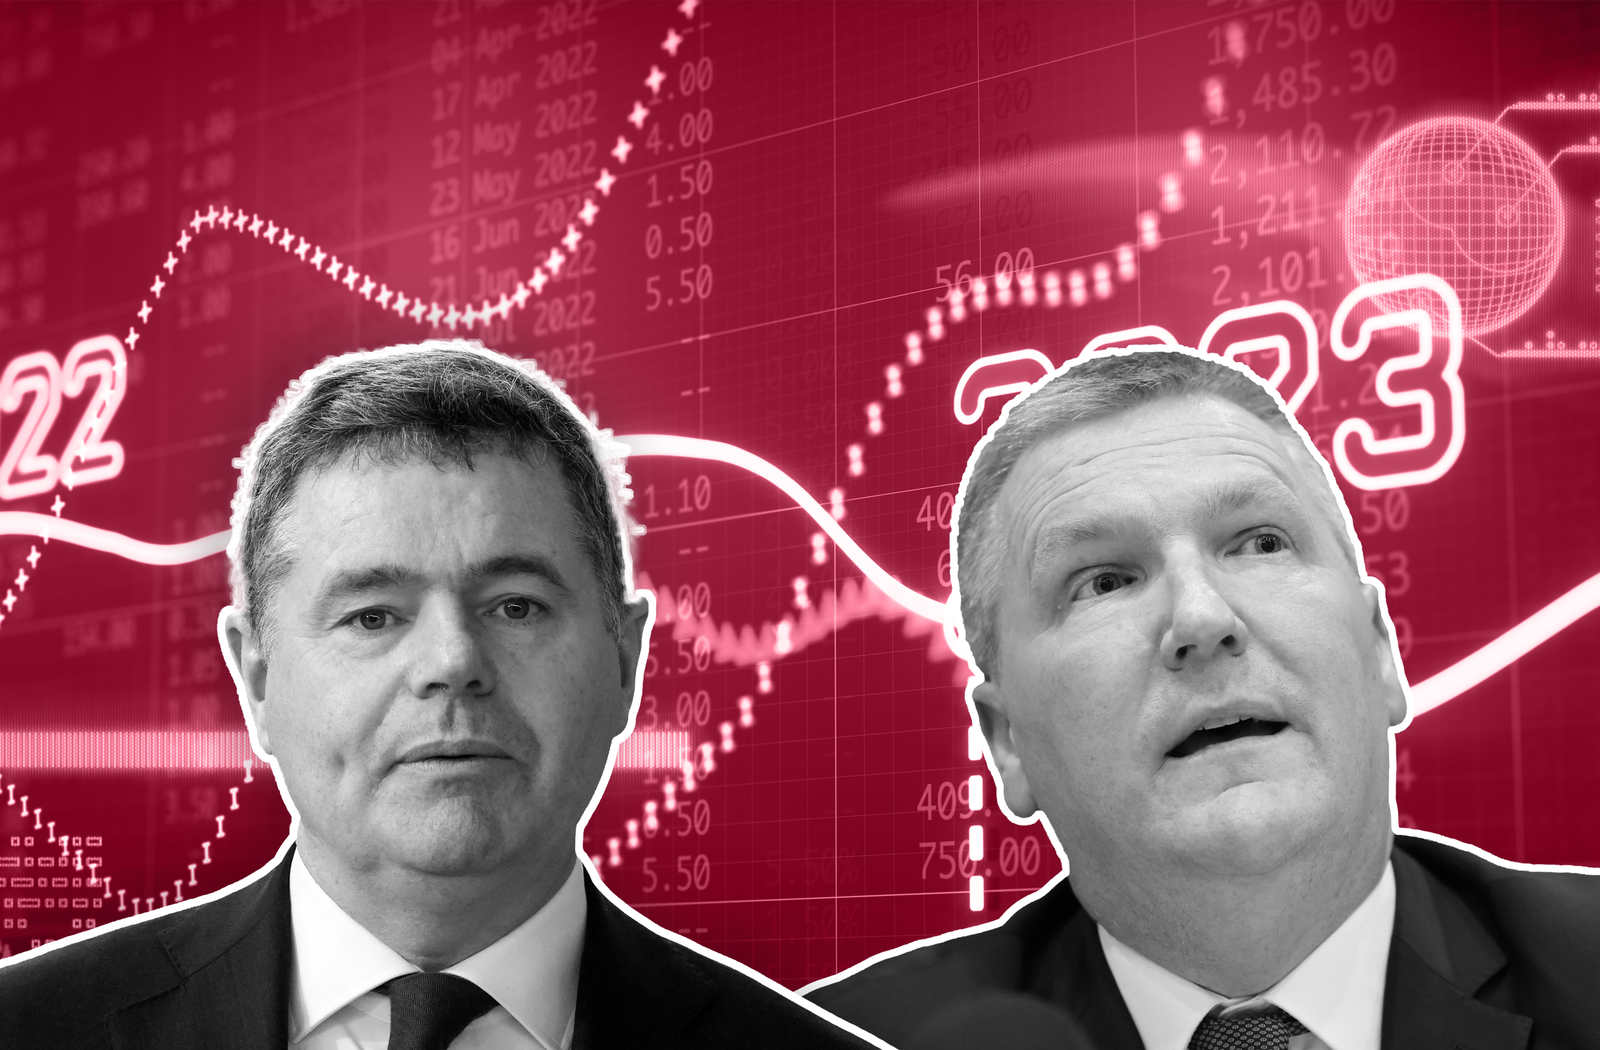 The two budget ministers, Paschal Donohoe and Michael McGrath, will argue for a portion of the extra cash to be used for paying down some of the national debt. Illustration: Dean Ruxton